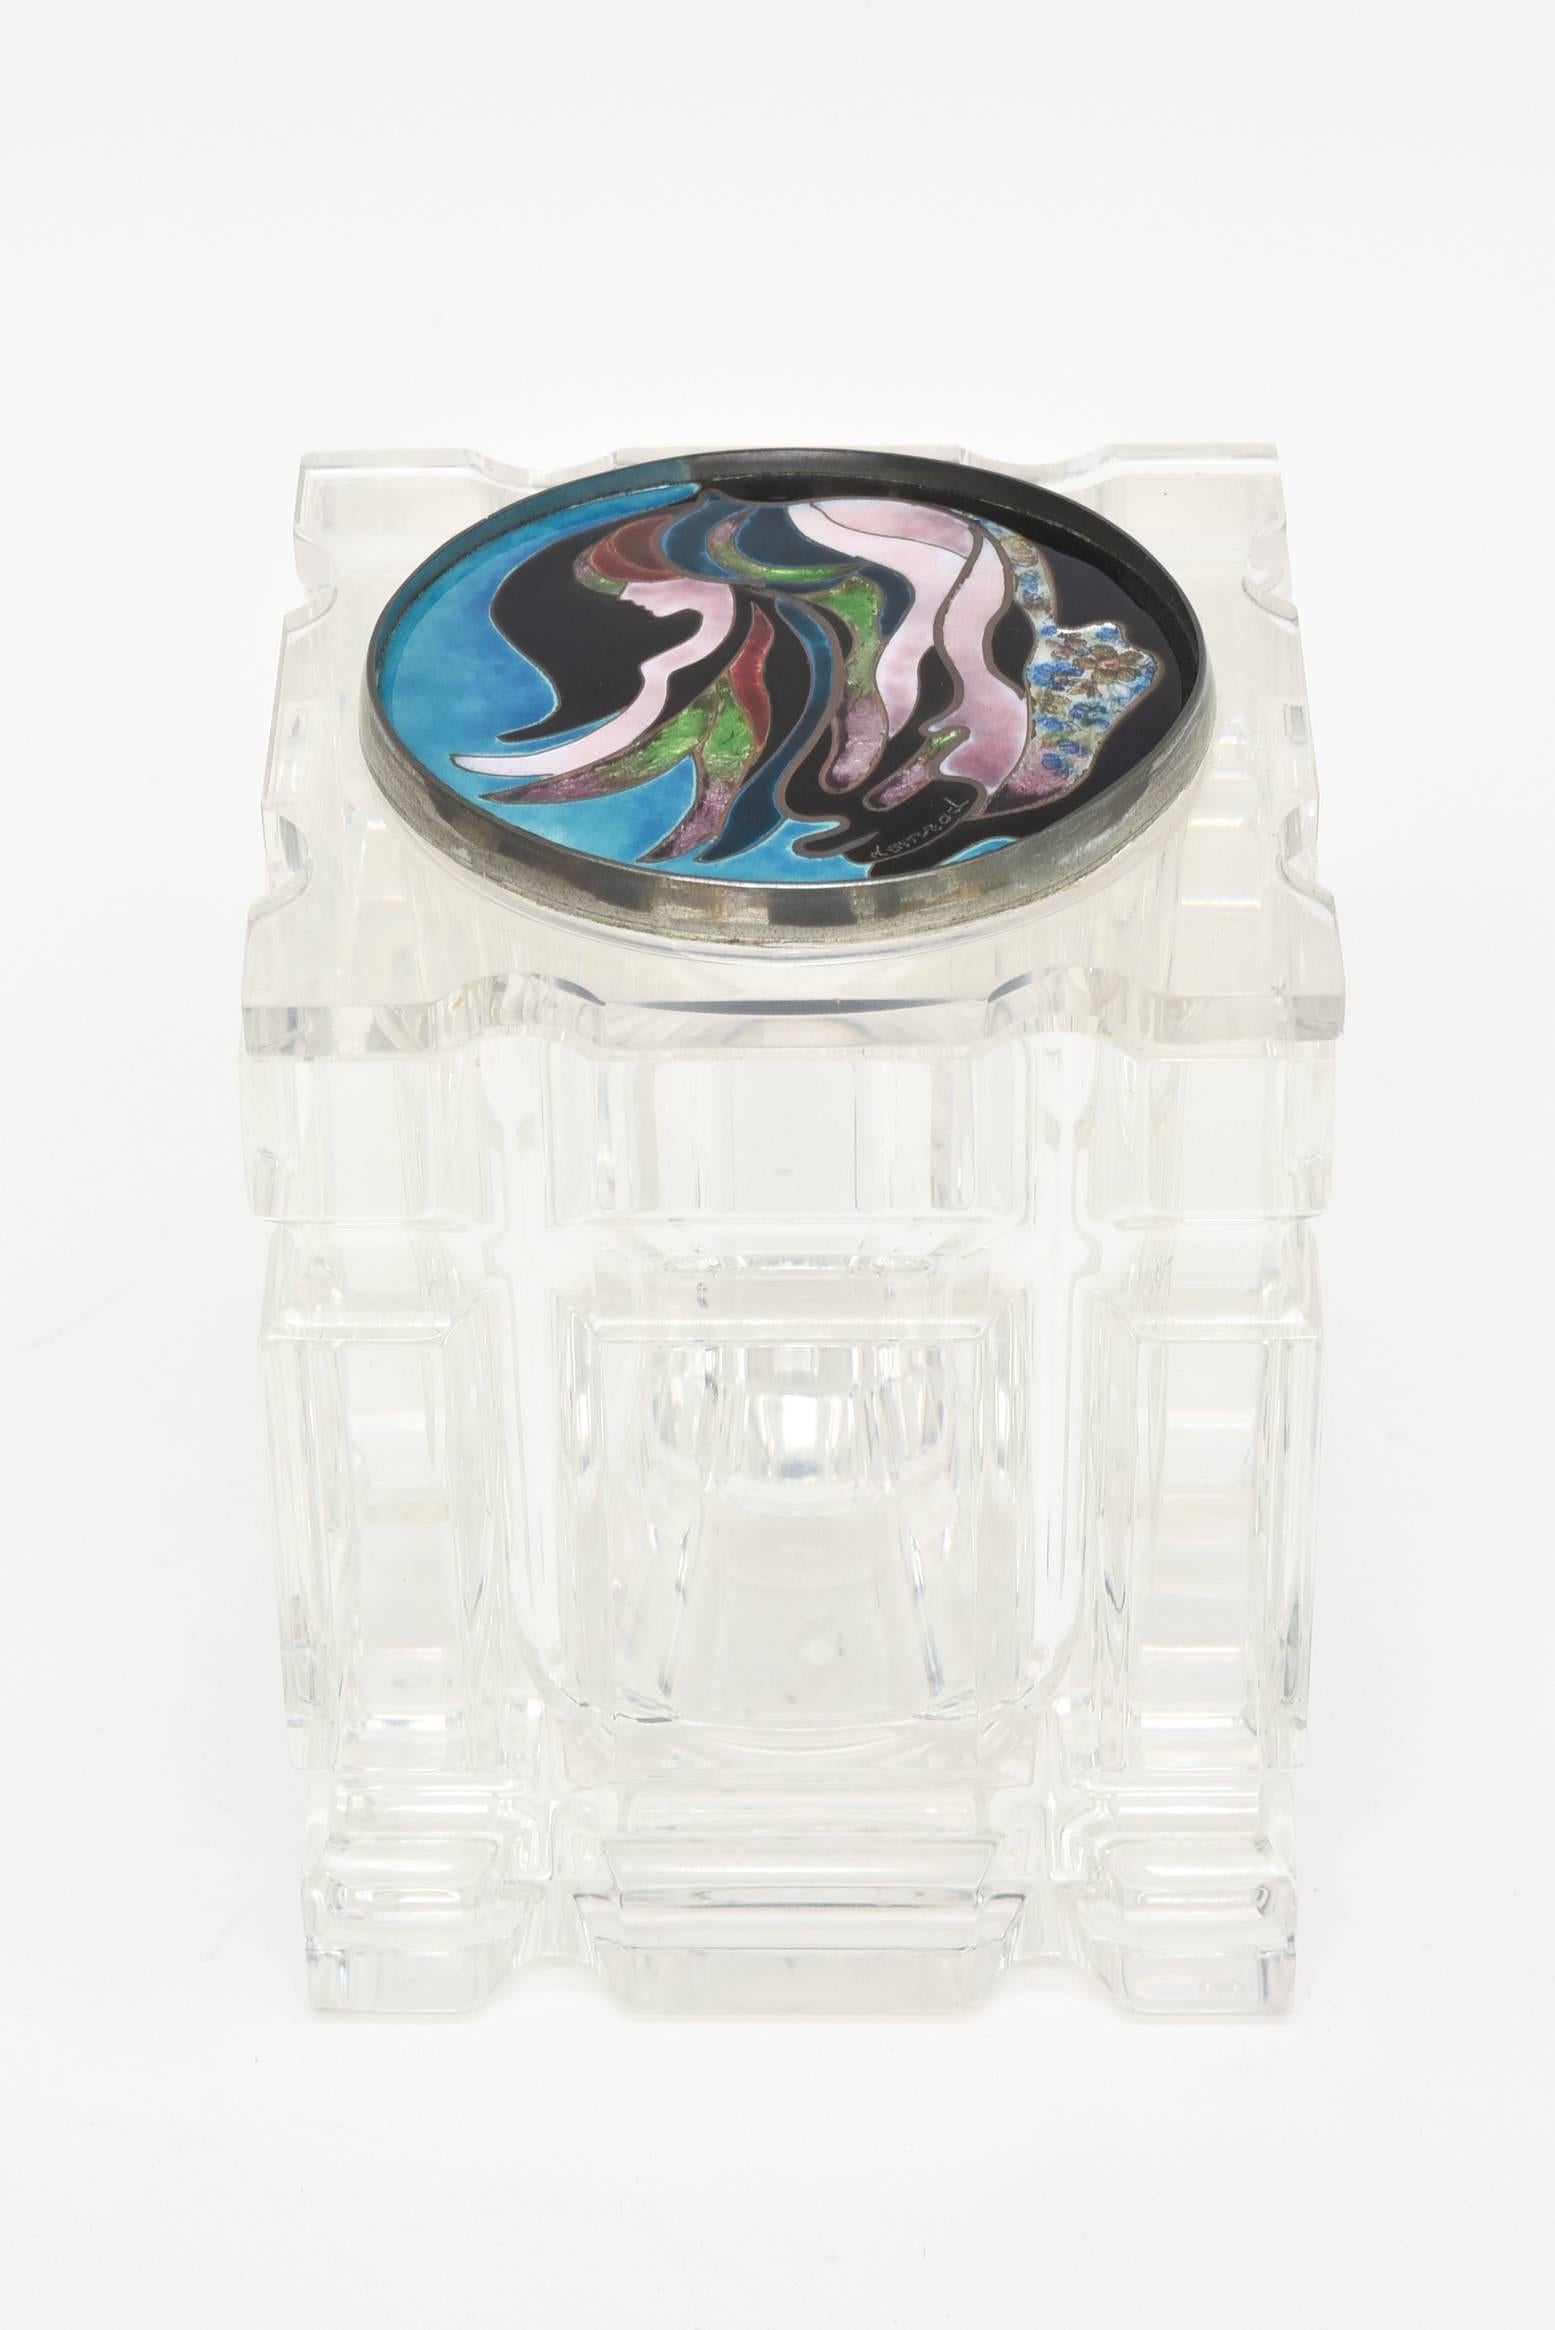 This vintage lucite and mixed-media box, vessel or container has a removable foiled enameled cloisonné top with a spectacular signed artistic design. The colors of the enamel top are turquoise, pink, black, green. white and etc. The abstract top